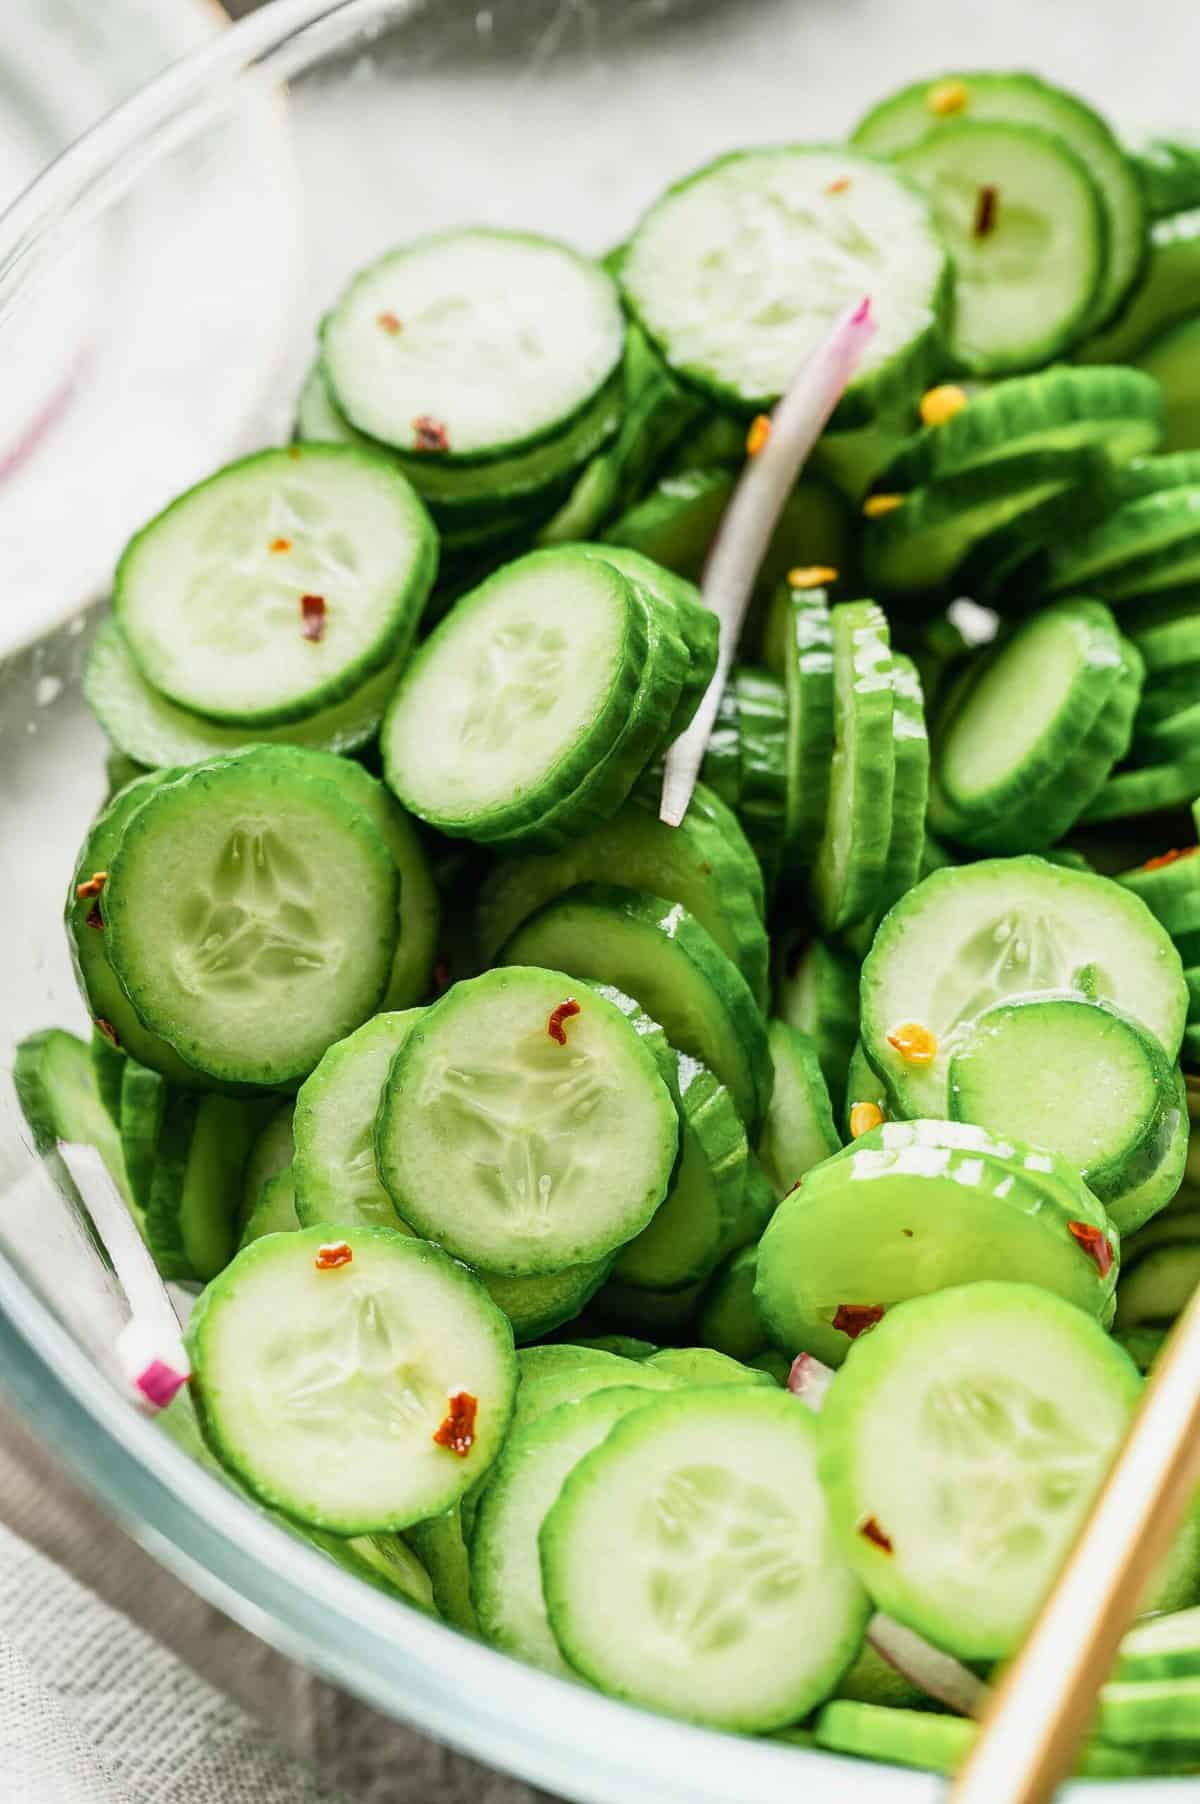 Cucumber salad in large glass bowl